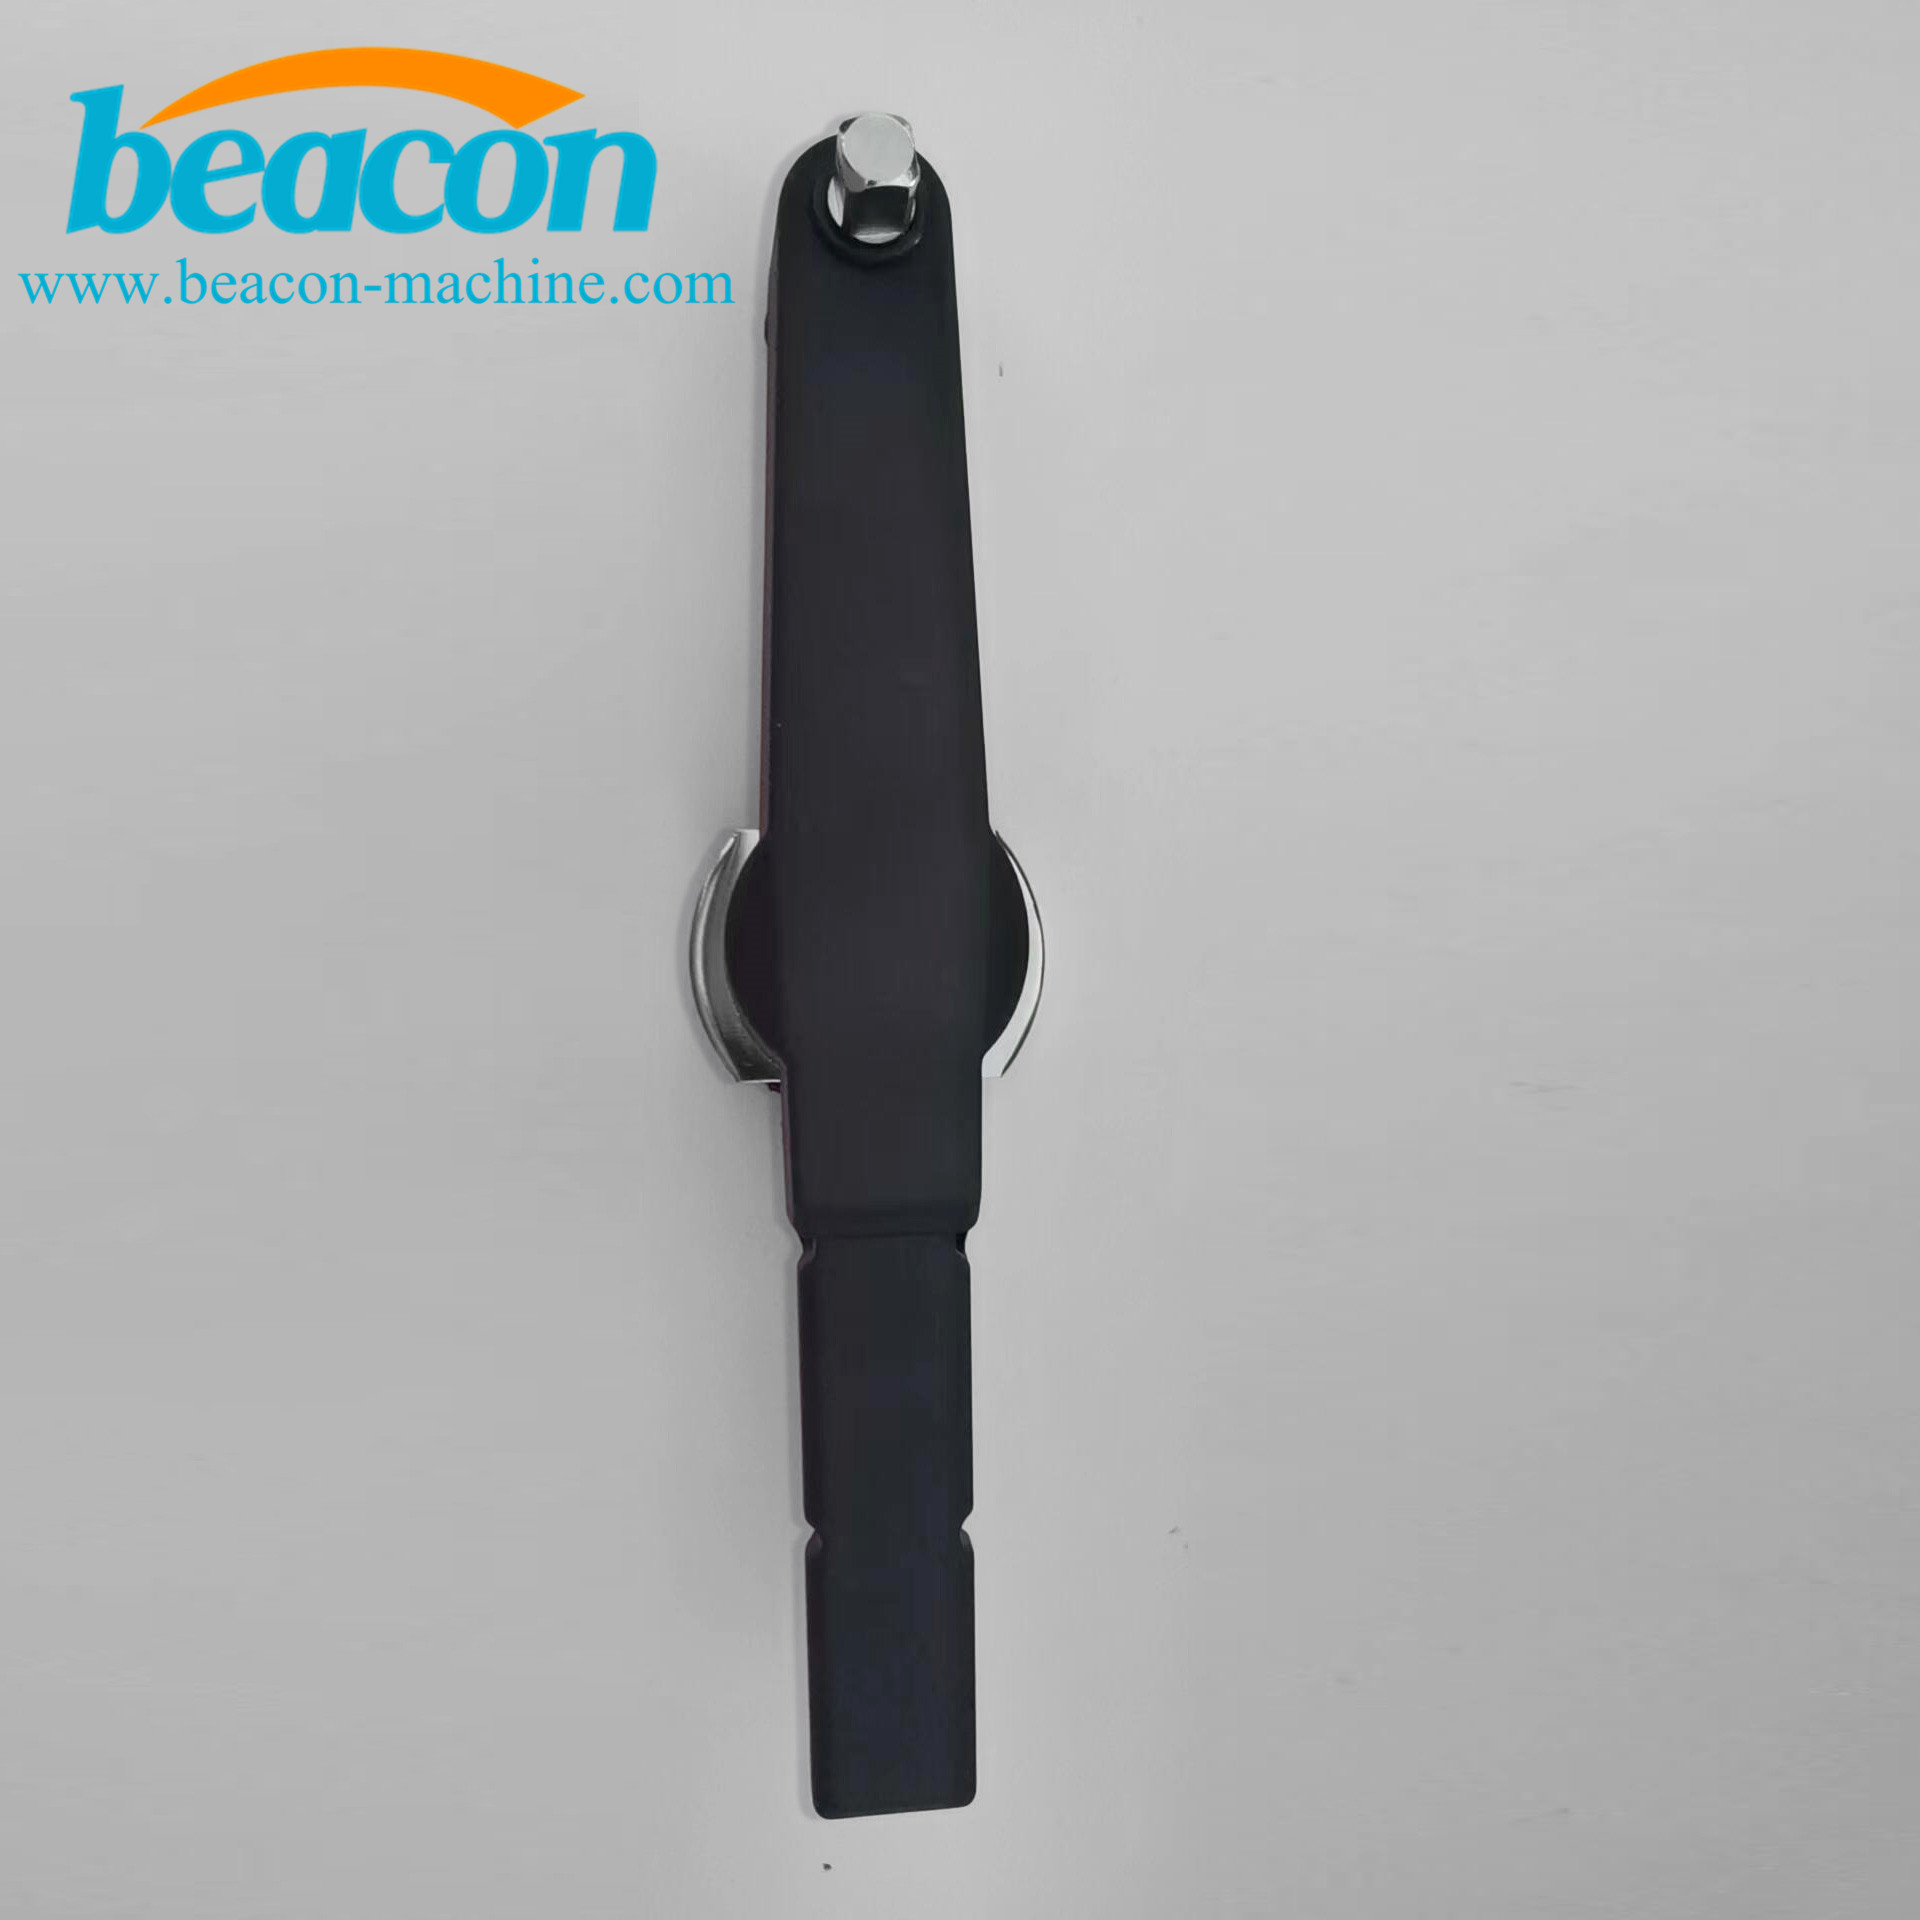 Diesel injector repair tool torque wrench with pointer